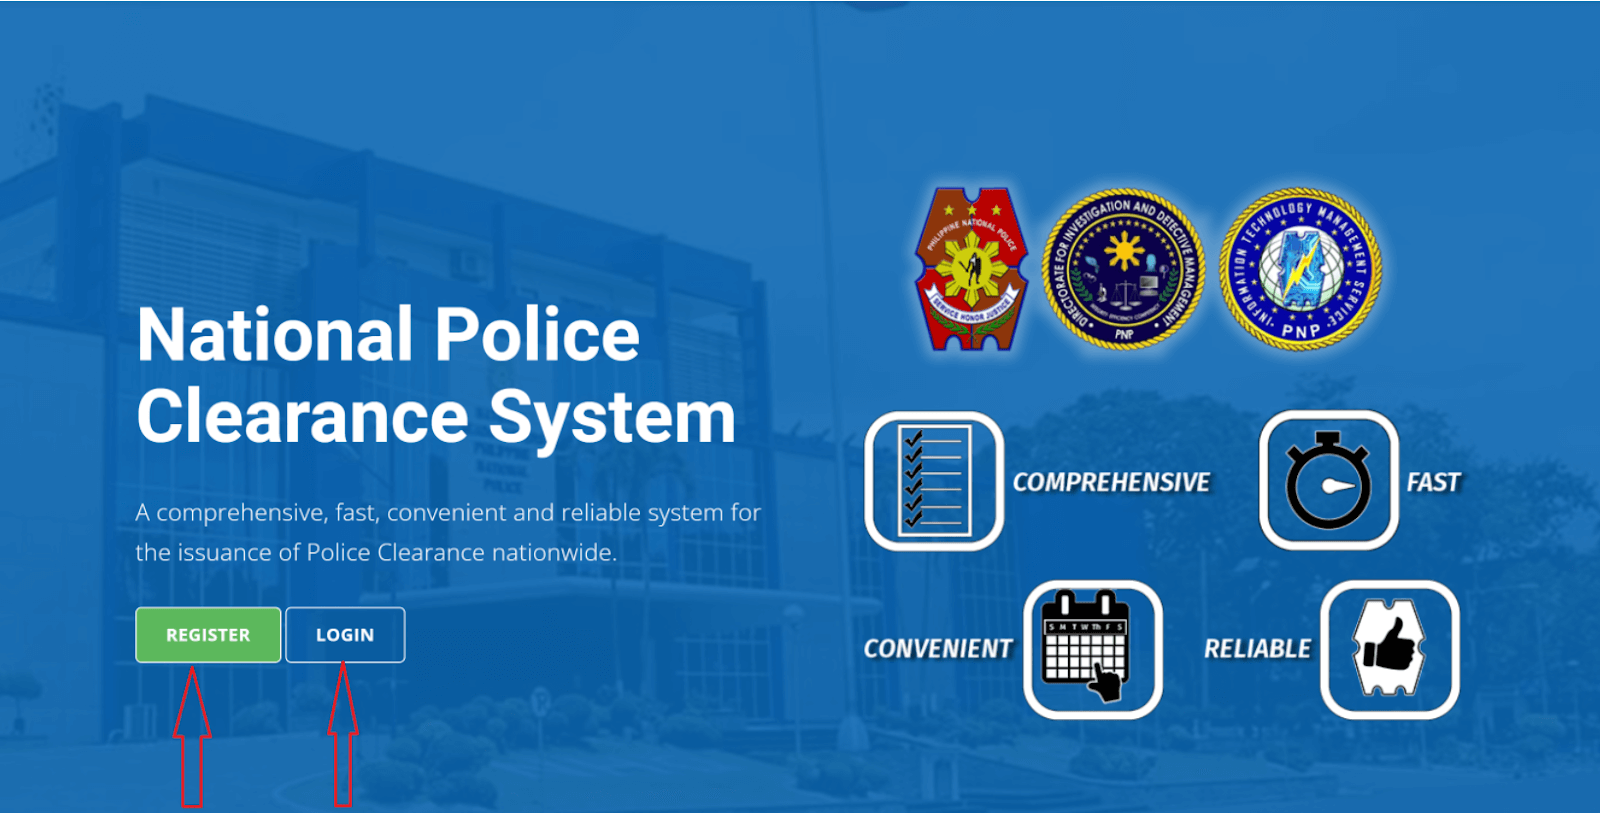 log in on the National Police Clearance System